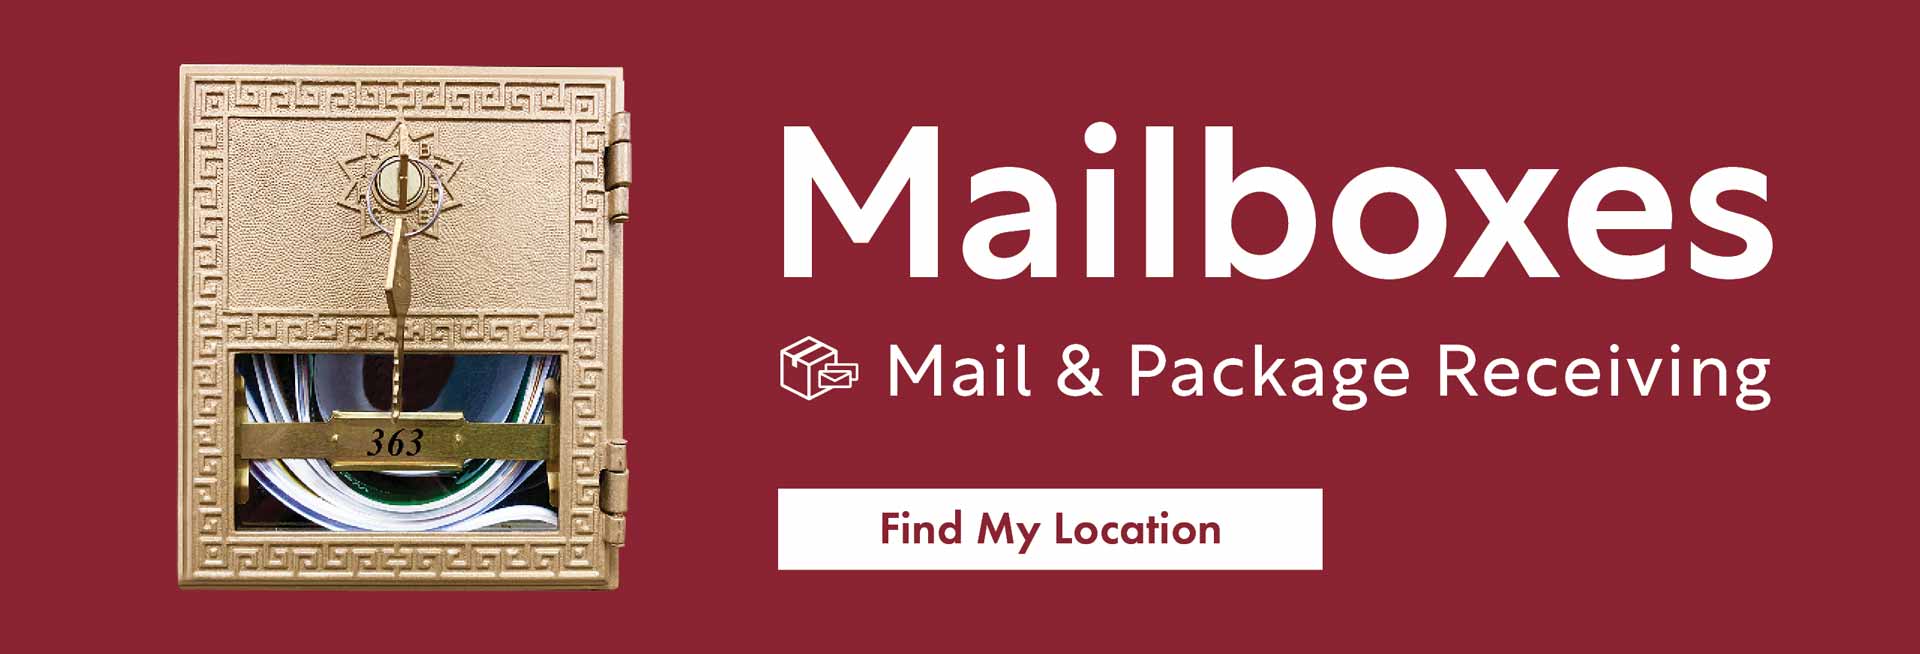 Mailboxes - Mail and Package Receiving - Find My Location